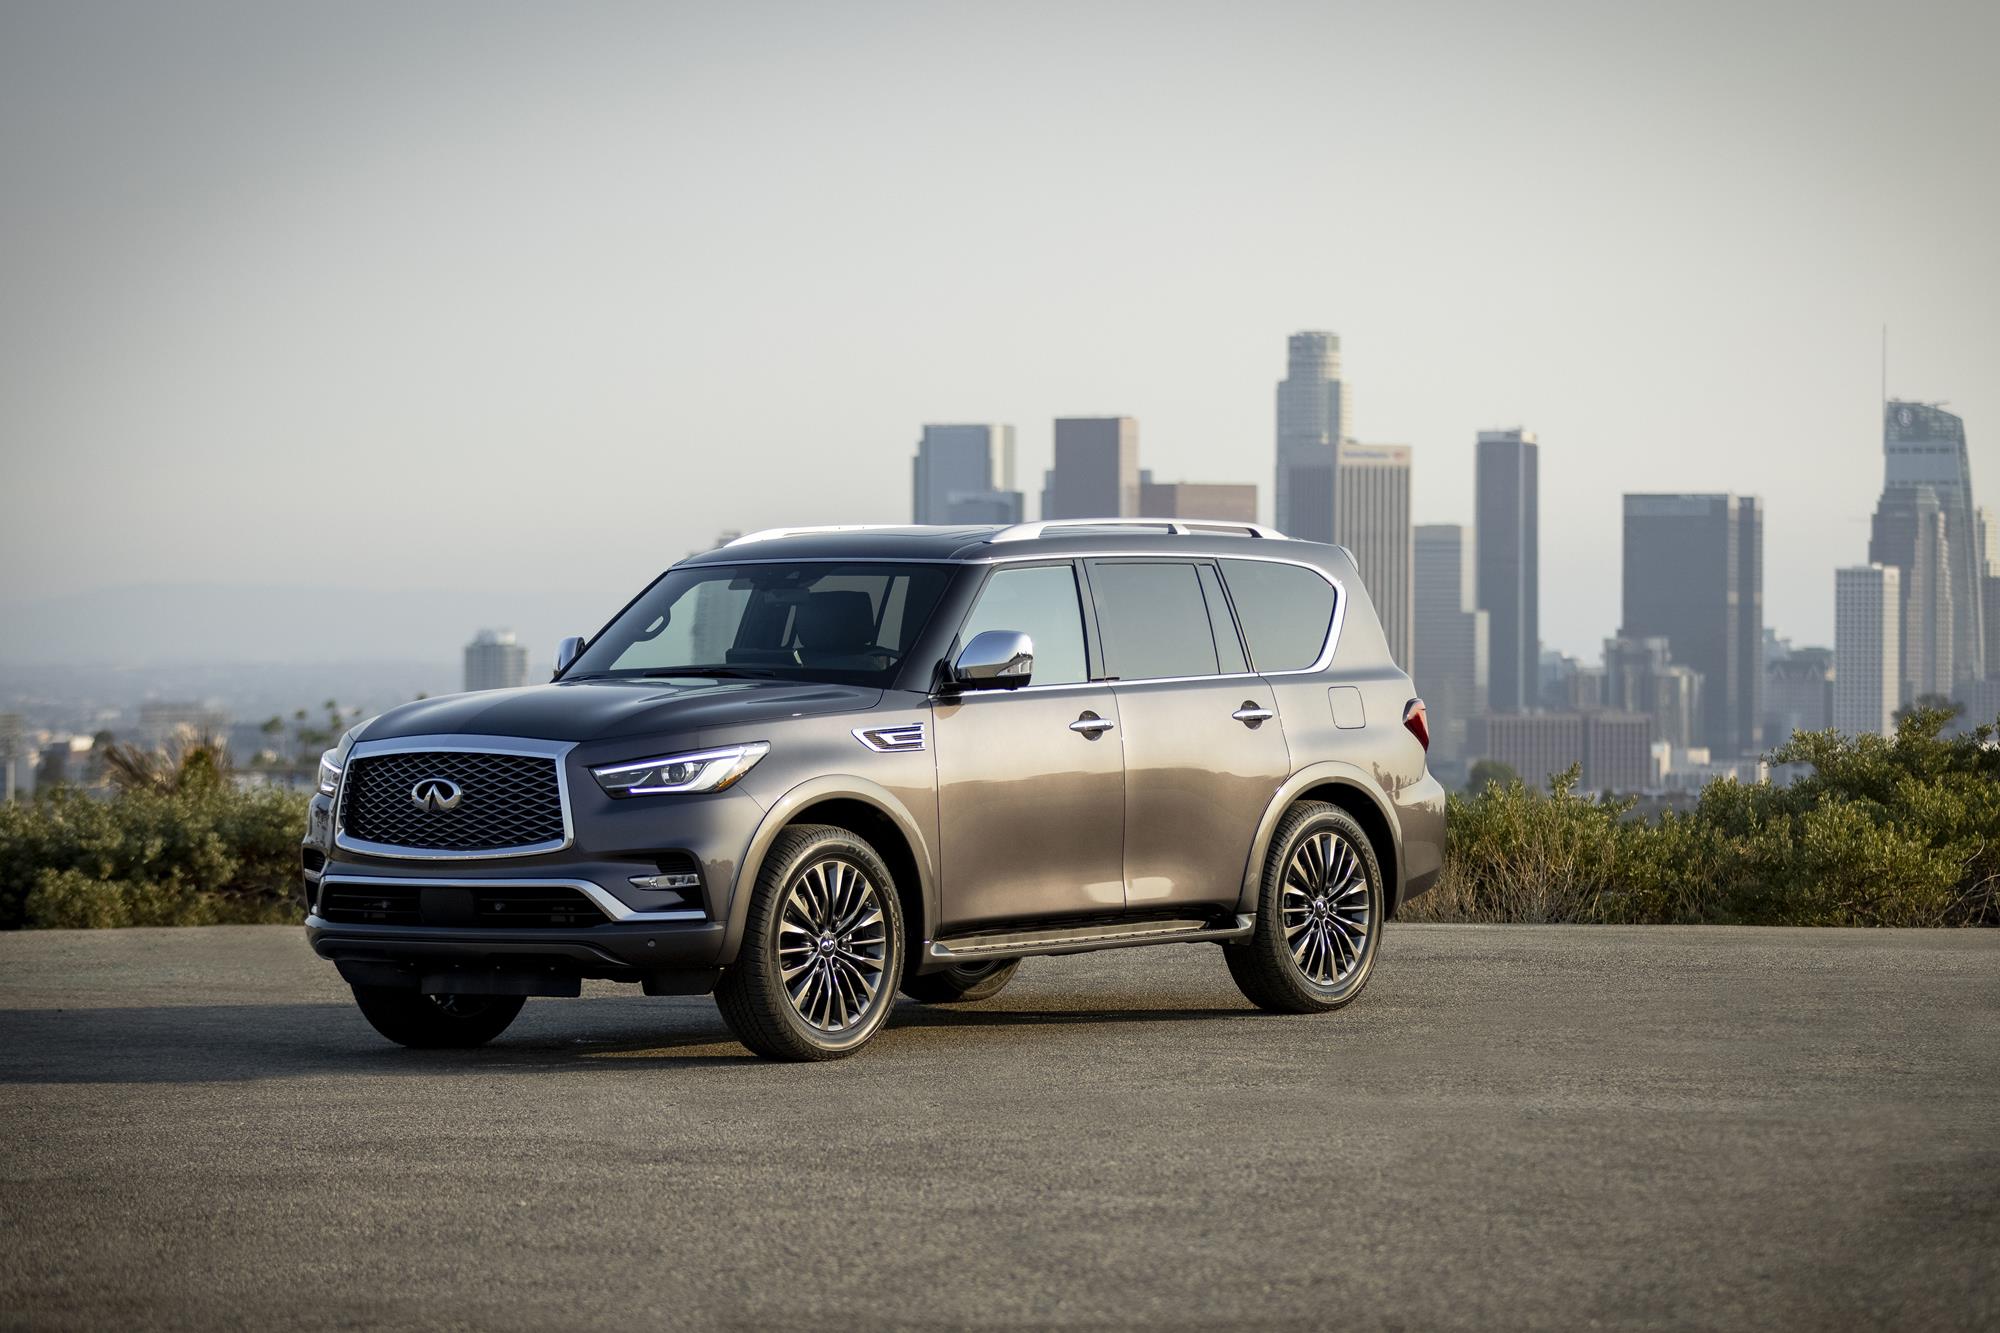 Review: 2022 Infiniti QX80 is BIG Lux